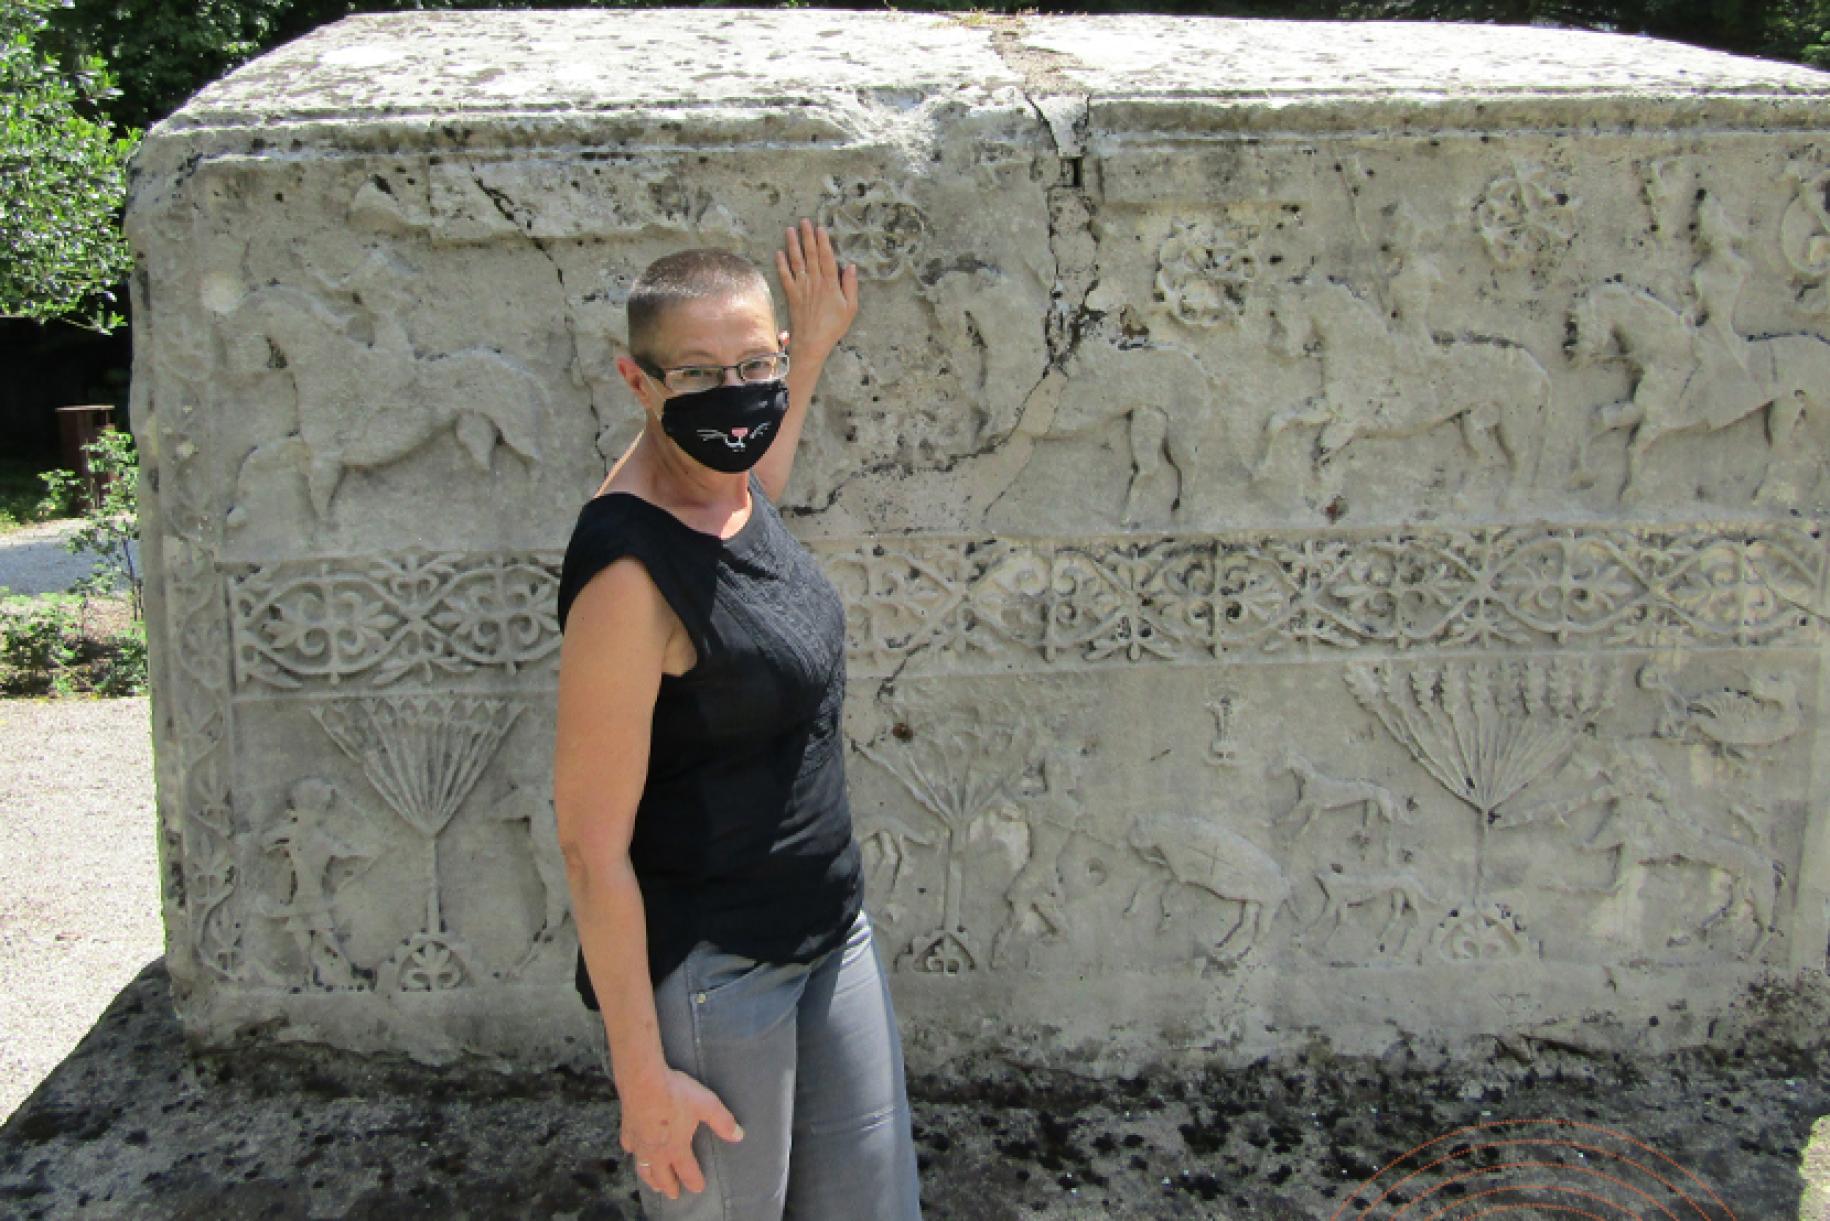 Andrea Dautovic stands by a large boxed sculpture at the National Museum of BiH wearing a face mask.